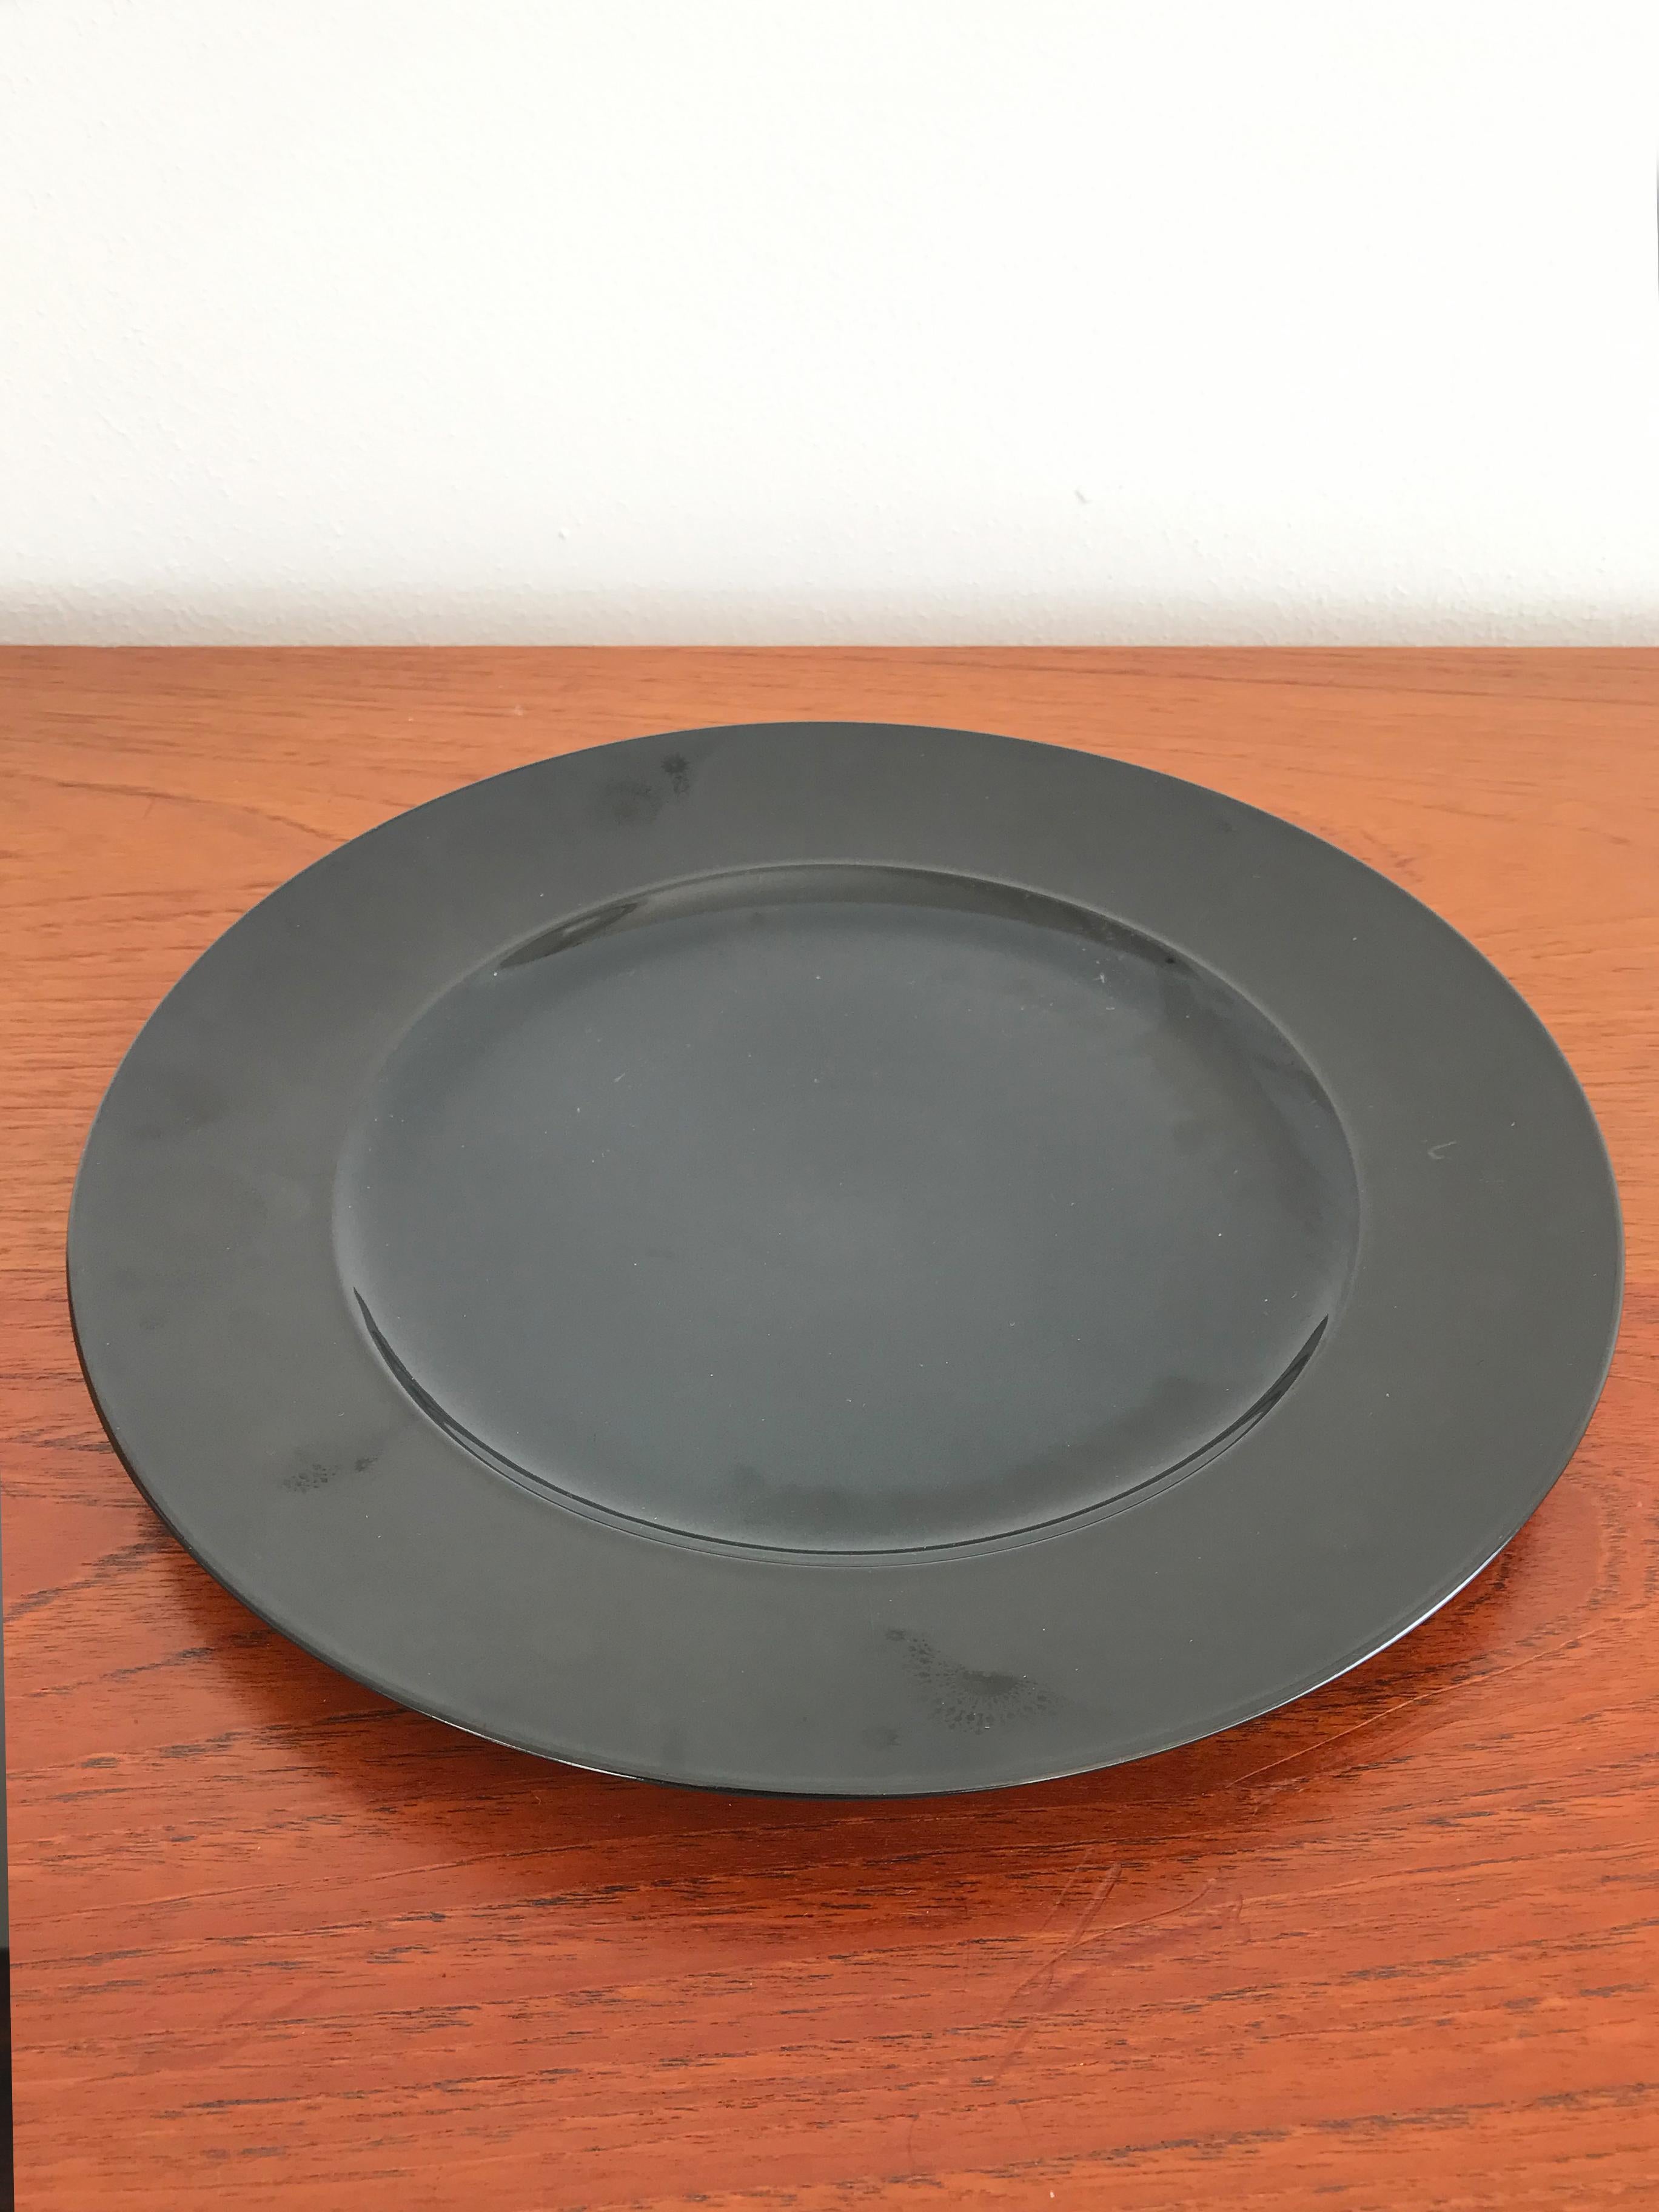 Vintage dish plate in black porcelain designed by Tapio Wirkkala for Rosenthal Studio Linie “Porcelaine Noire” serie with shiny and matte tone-on-tone decoration on the edge, Germany 1970s
Signed under the base “Rosenthal Studio Linie Porcelaine